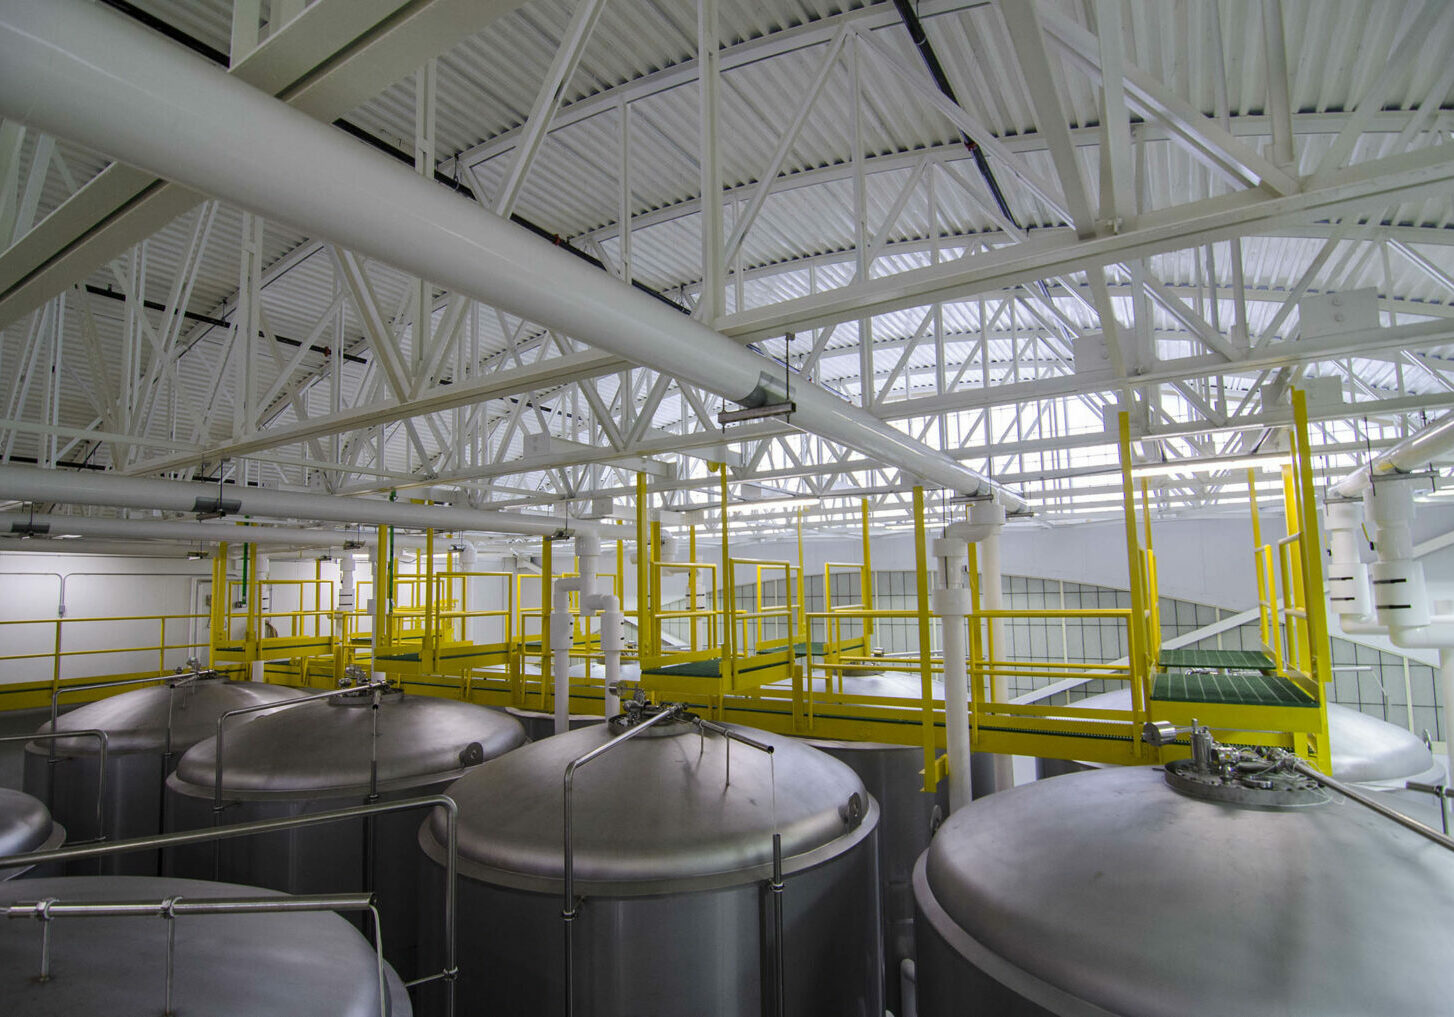 Interior view of a brewery's stills with a yellow walking plank